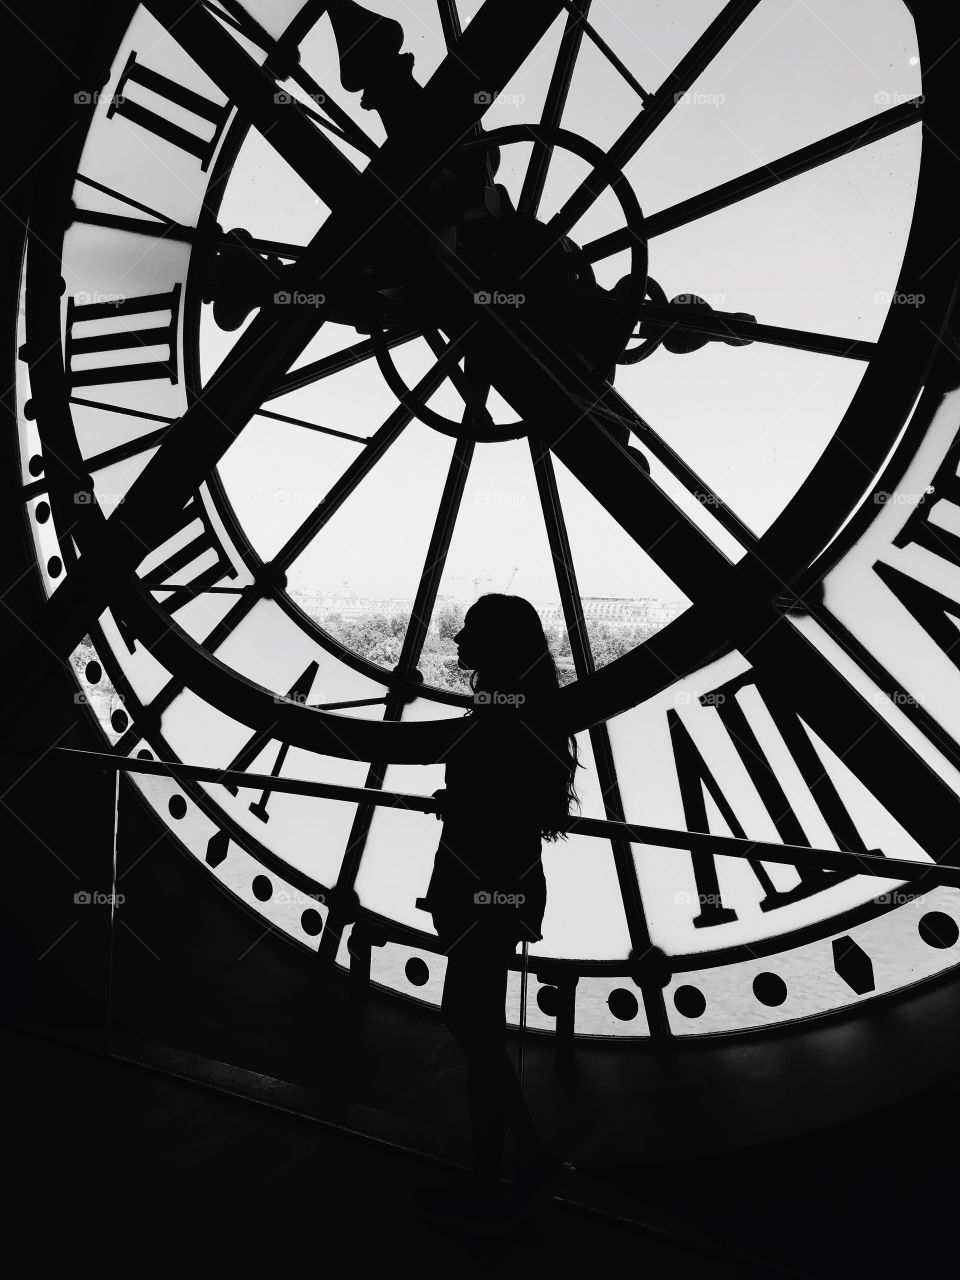 I recently when on a one-month trip to Europe with my friends. A once in a lifetime experience and what better way to remember it than through photographs. This picture was taken at the Musee D’Orsay, in Paris, France. 